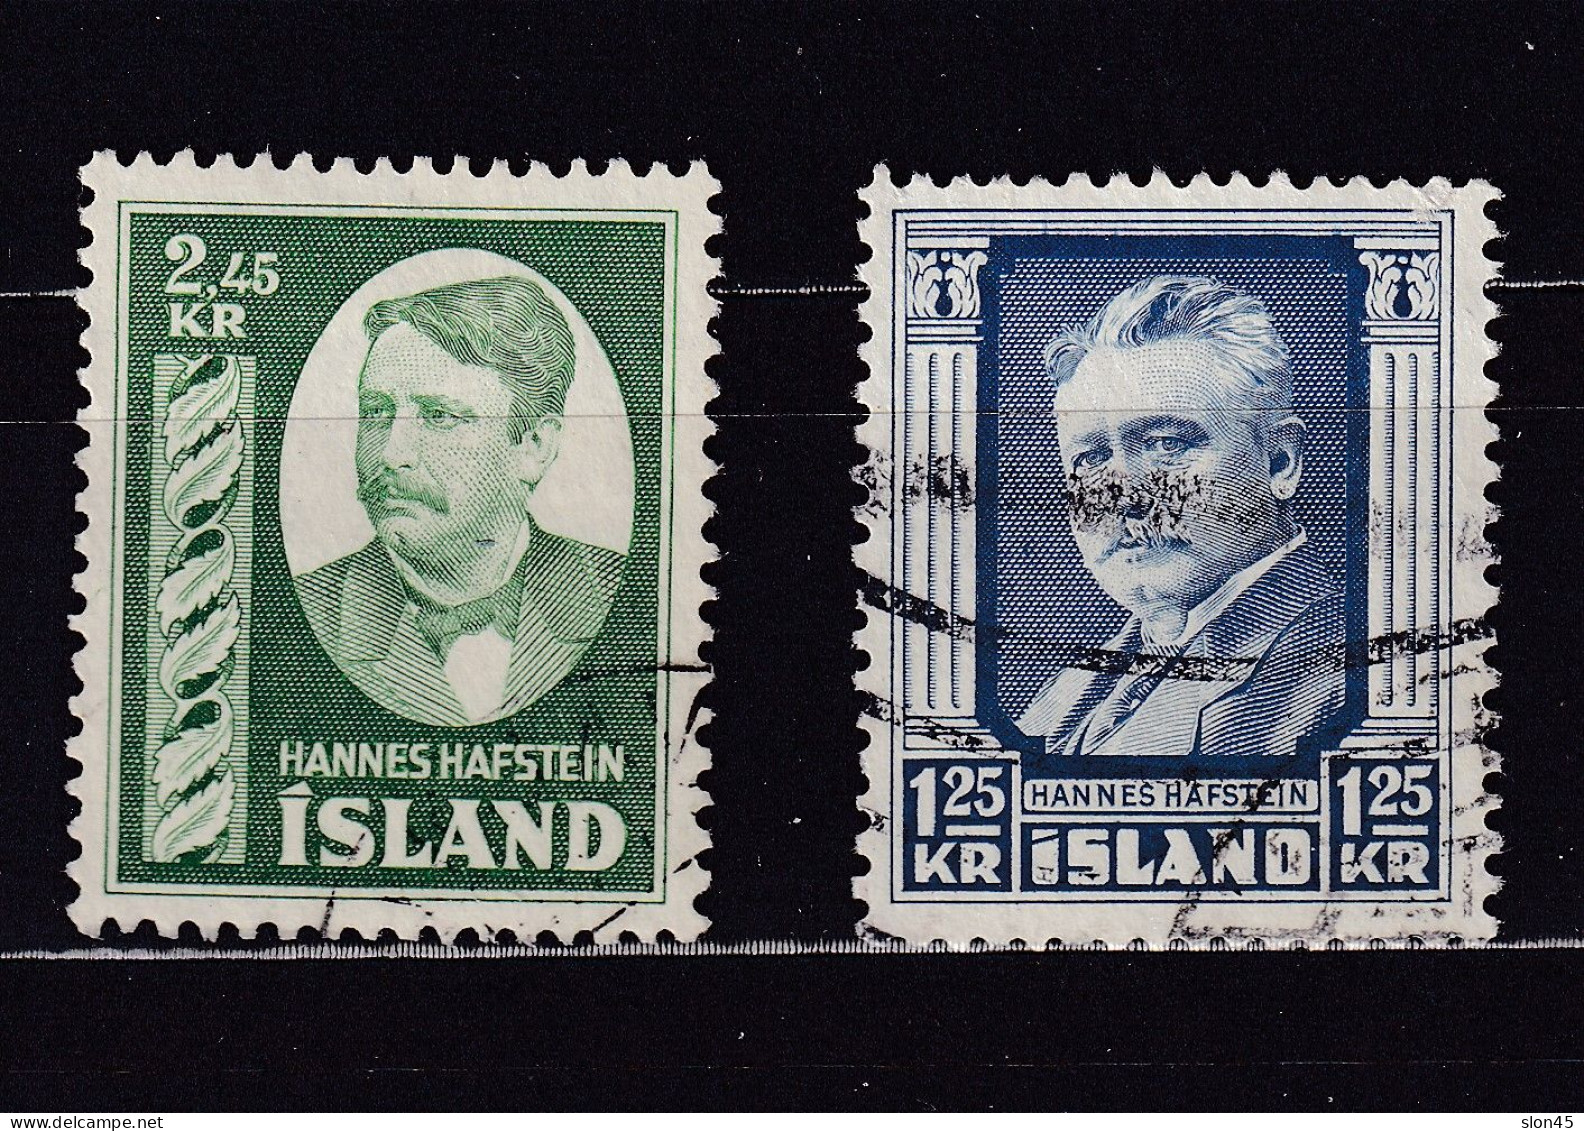 Iceland 1954 H.Hafstein Used Key Stamp 15675 - Used Stamps